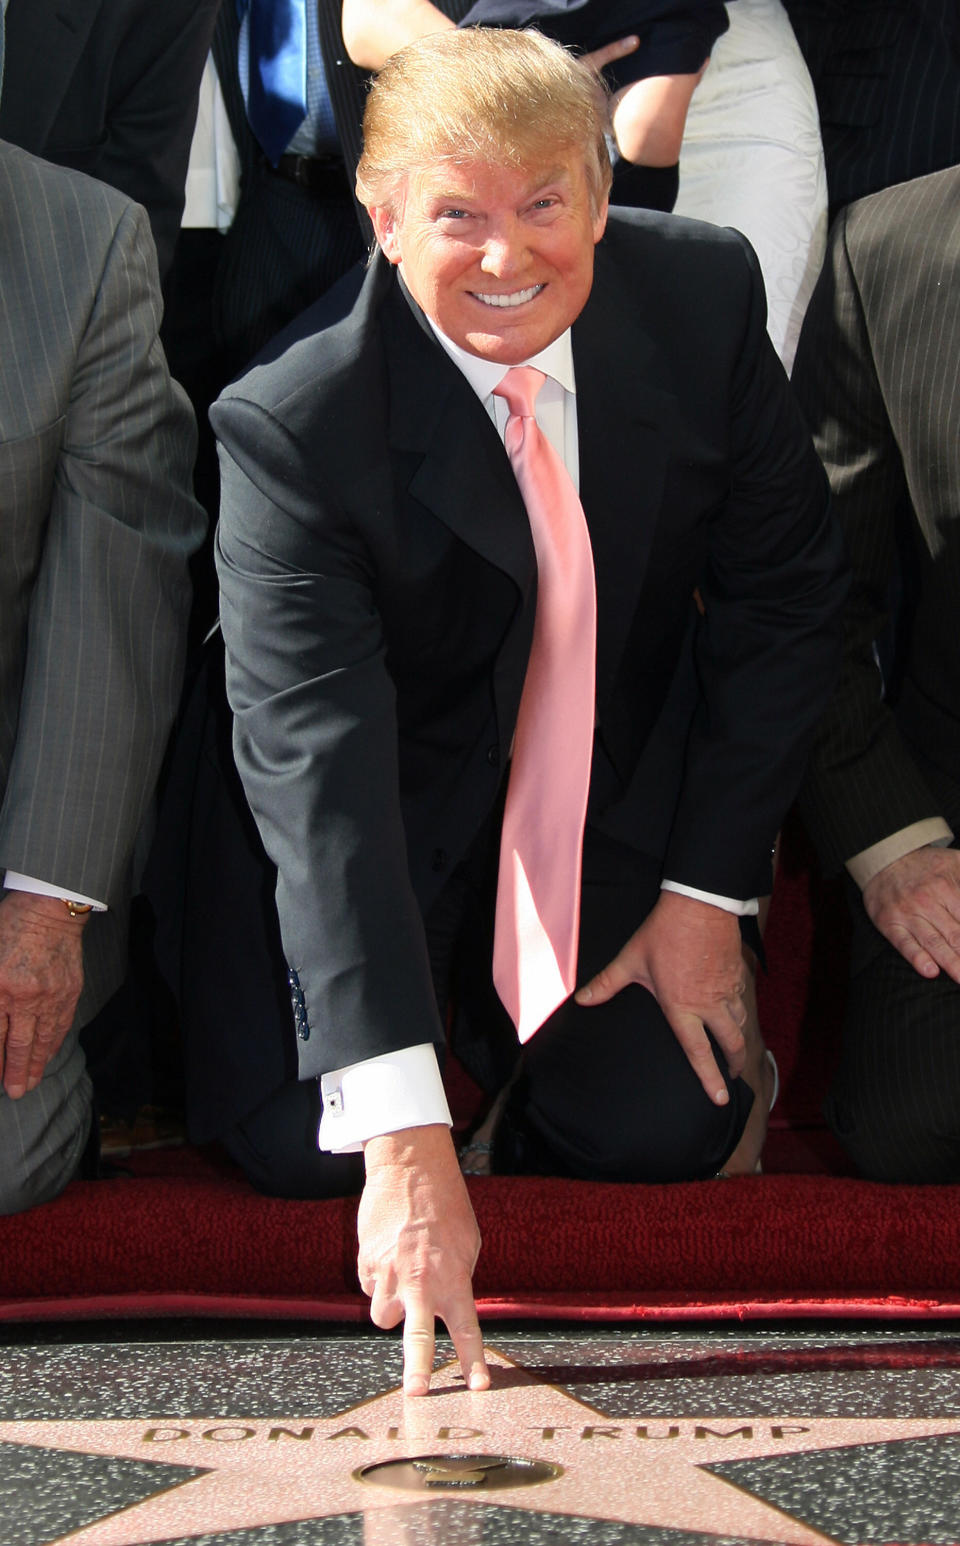 Donald Trump received a star on the Hollywood Walk of Fame in 2007. (Photo: Gabriel Bouys/AFP/Getty Images)